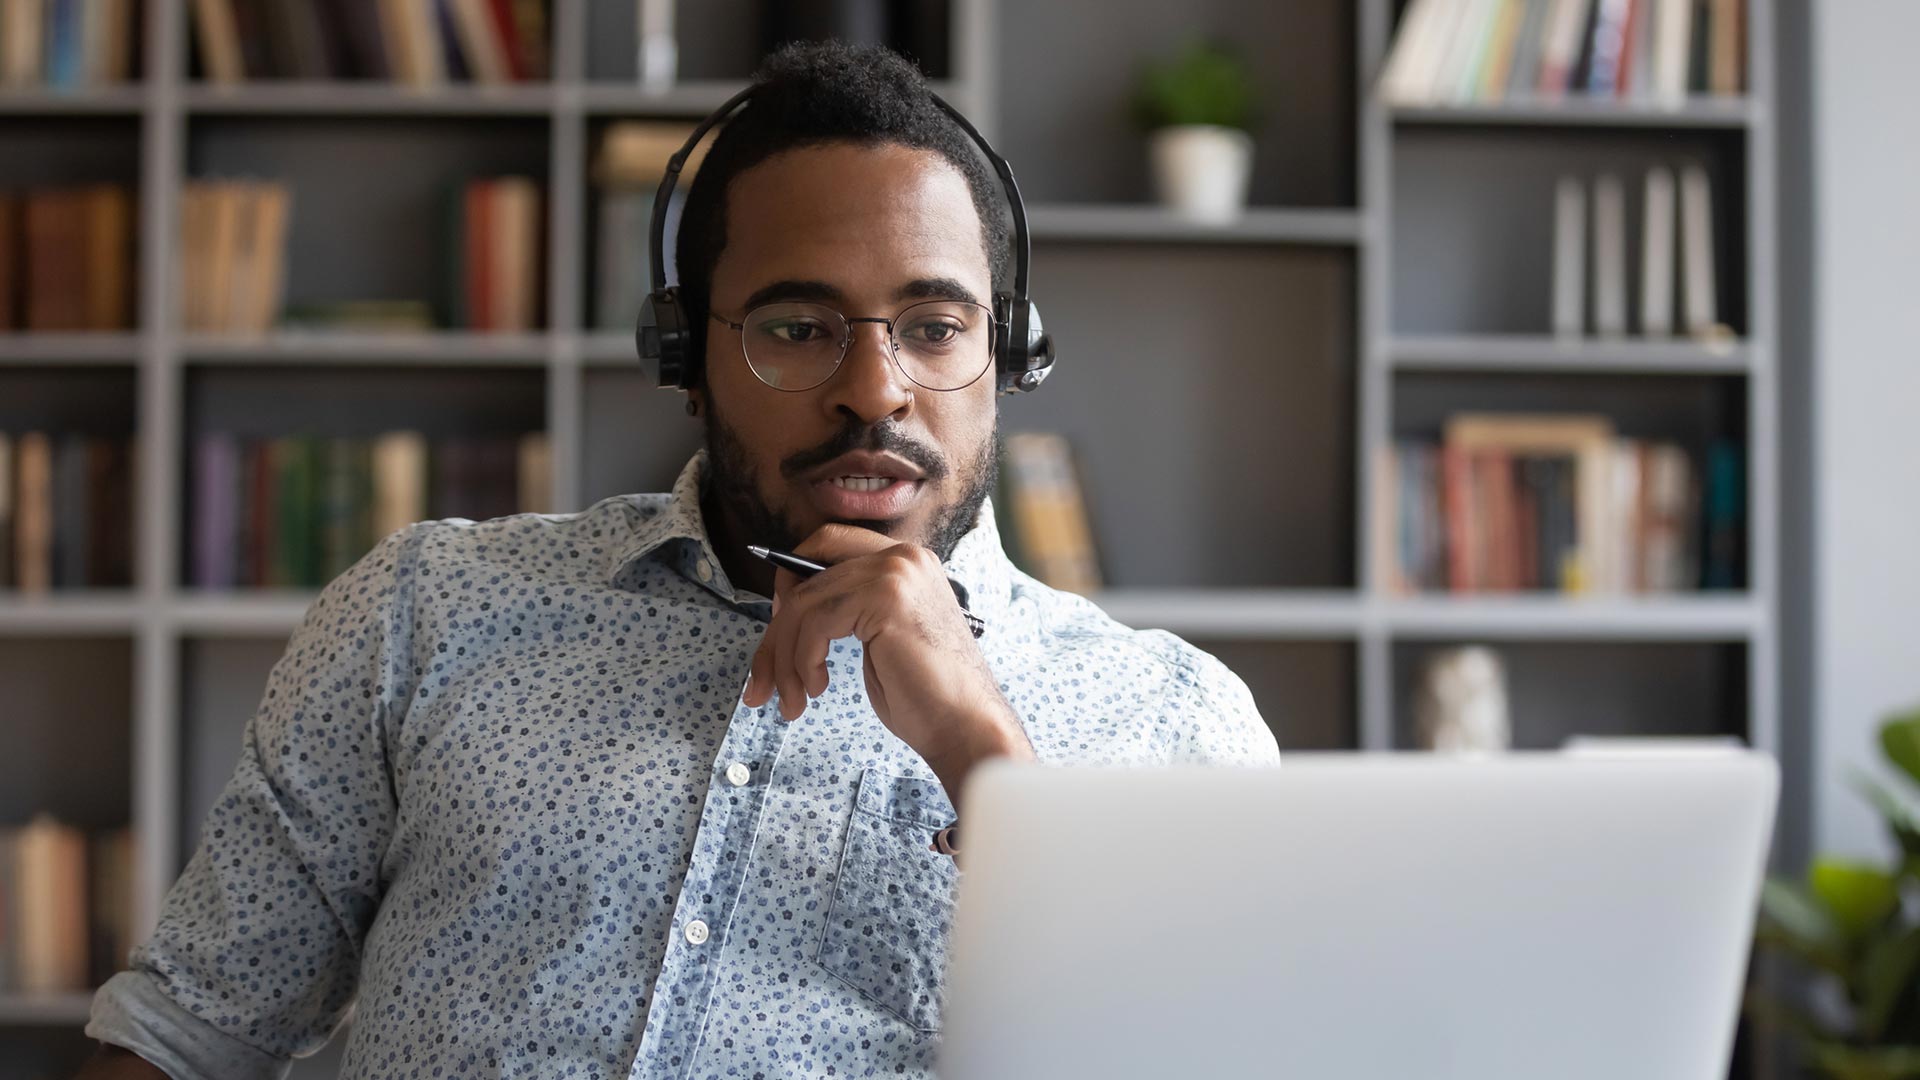 The Best Remote Collaboration Tools for Connecting Your Telework Team